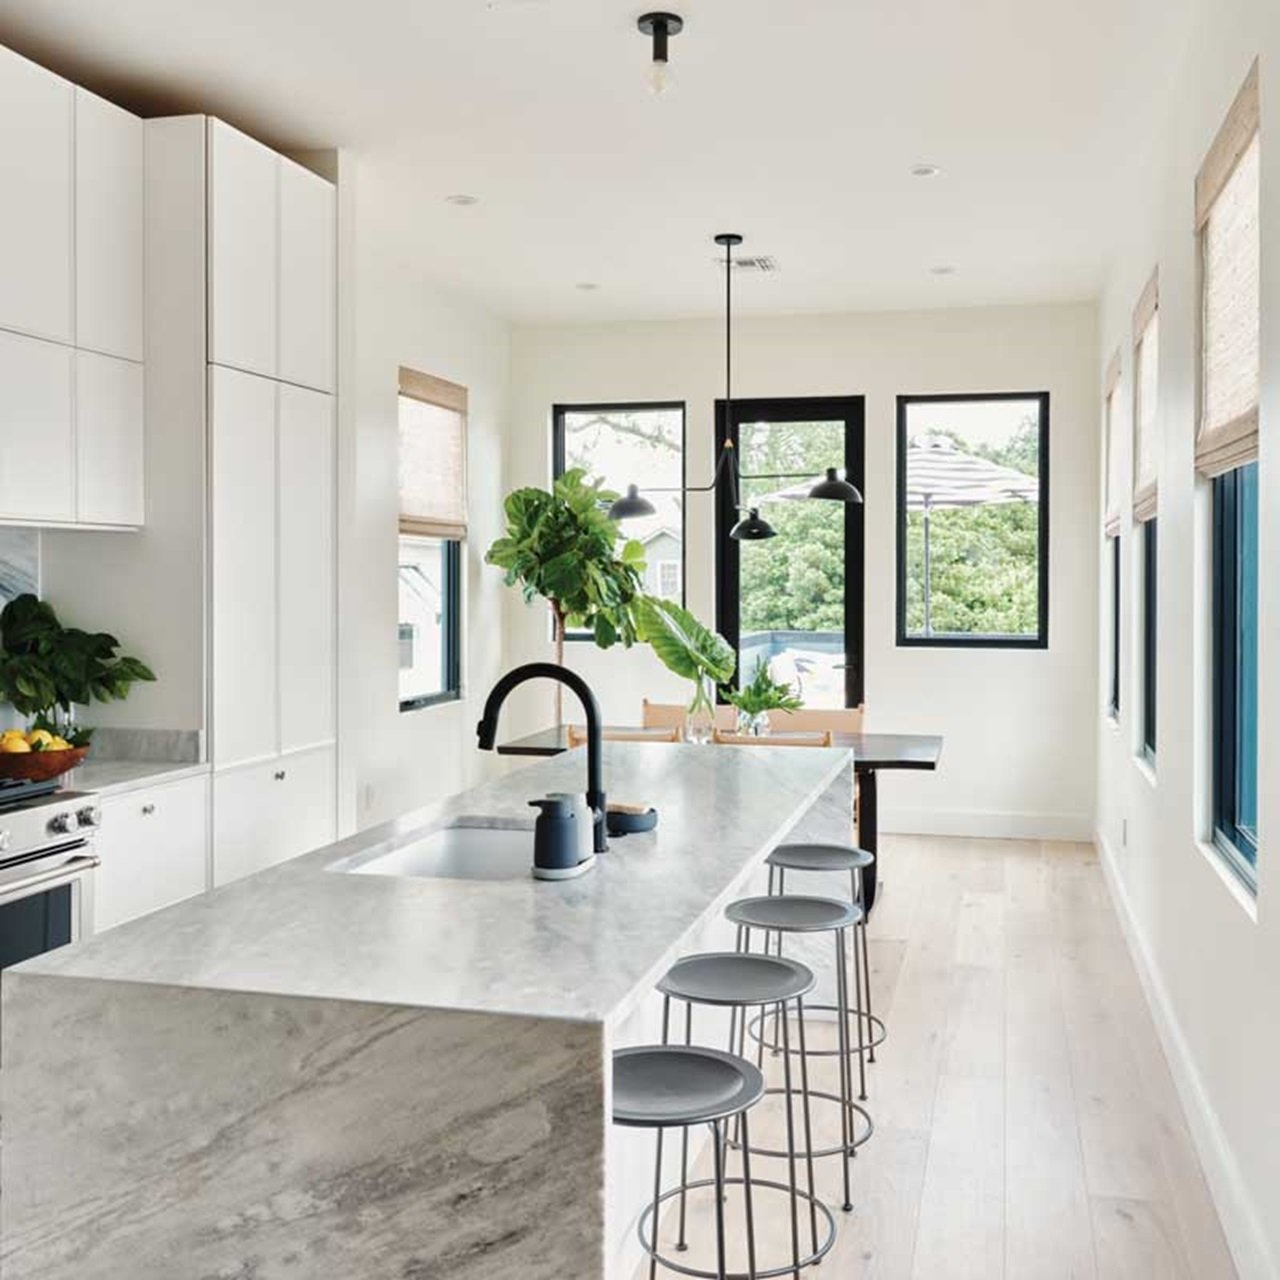 Kitchen with white marble countertop and casement windows